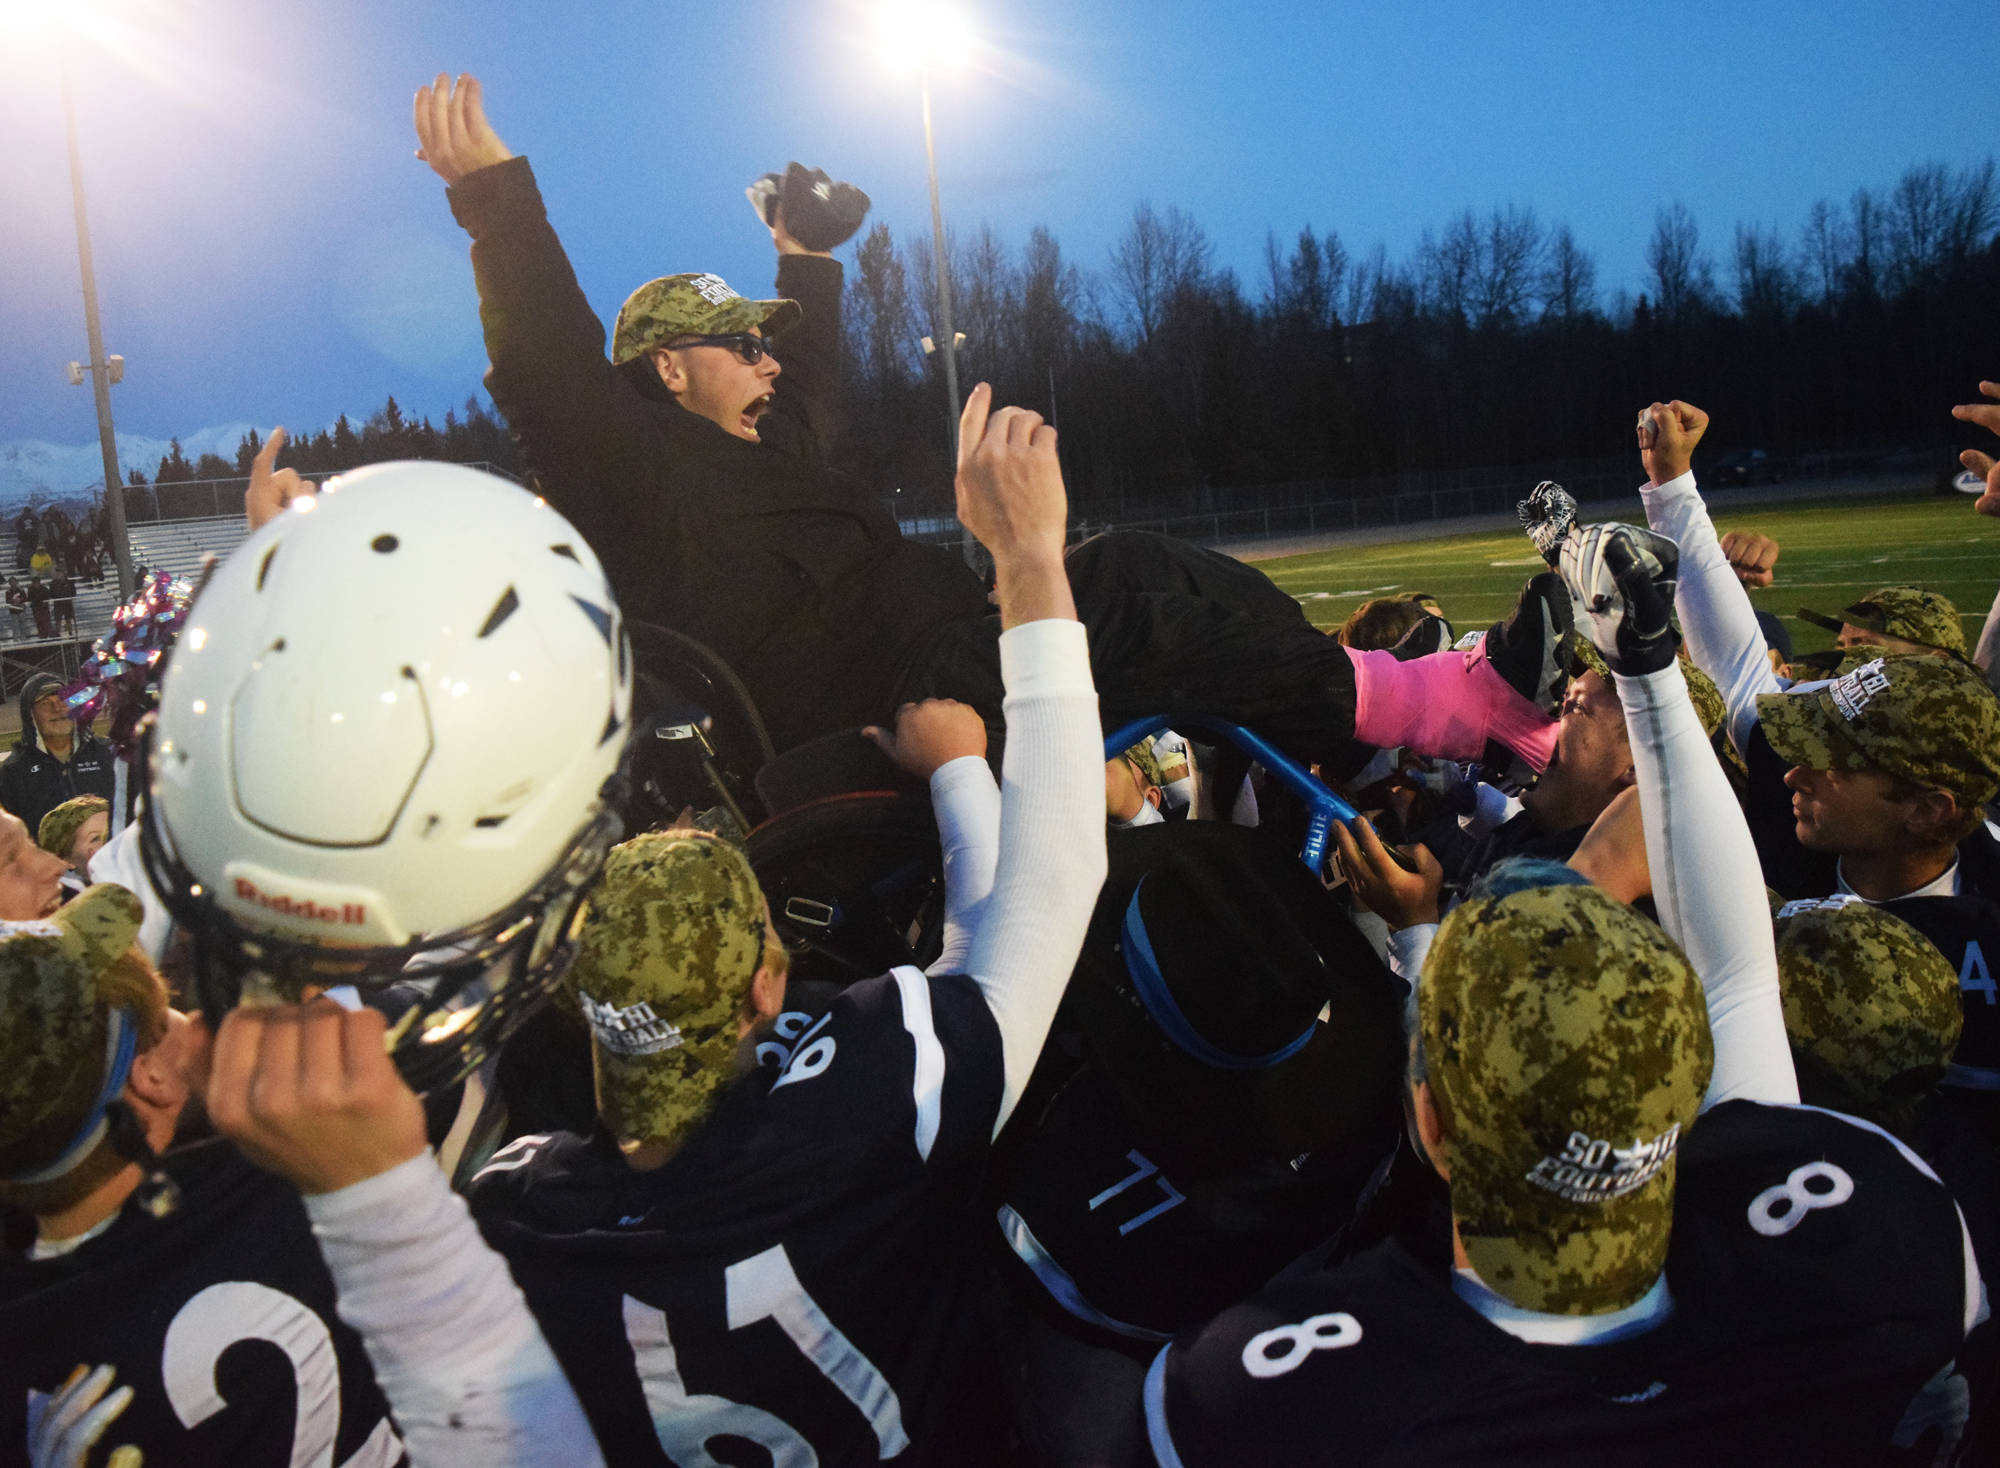 Members of the Soldotna football team lift up team manager Matthew Martinelli after winning Saturday, Oct. 19, 2019, at the Div. II state football championship at Anchorage Football Stadium in Anchorage, Alaska. The Stars defeated Lathrop 69-23. (Photo by Joey Klecka/Peninsula Clarion)